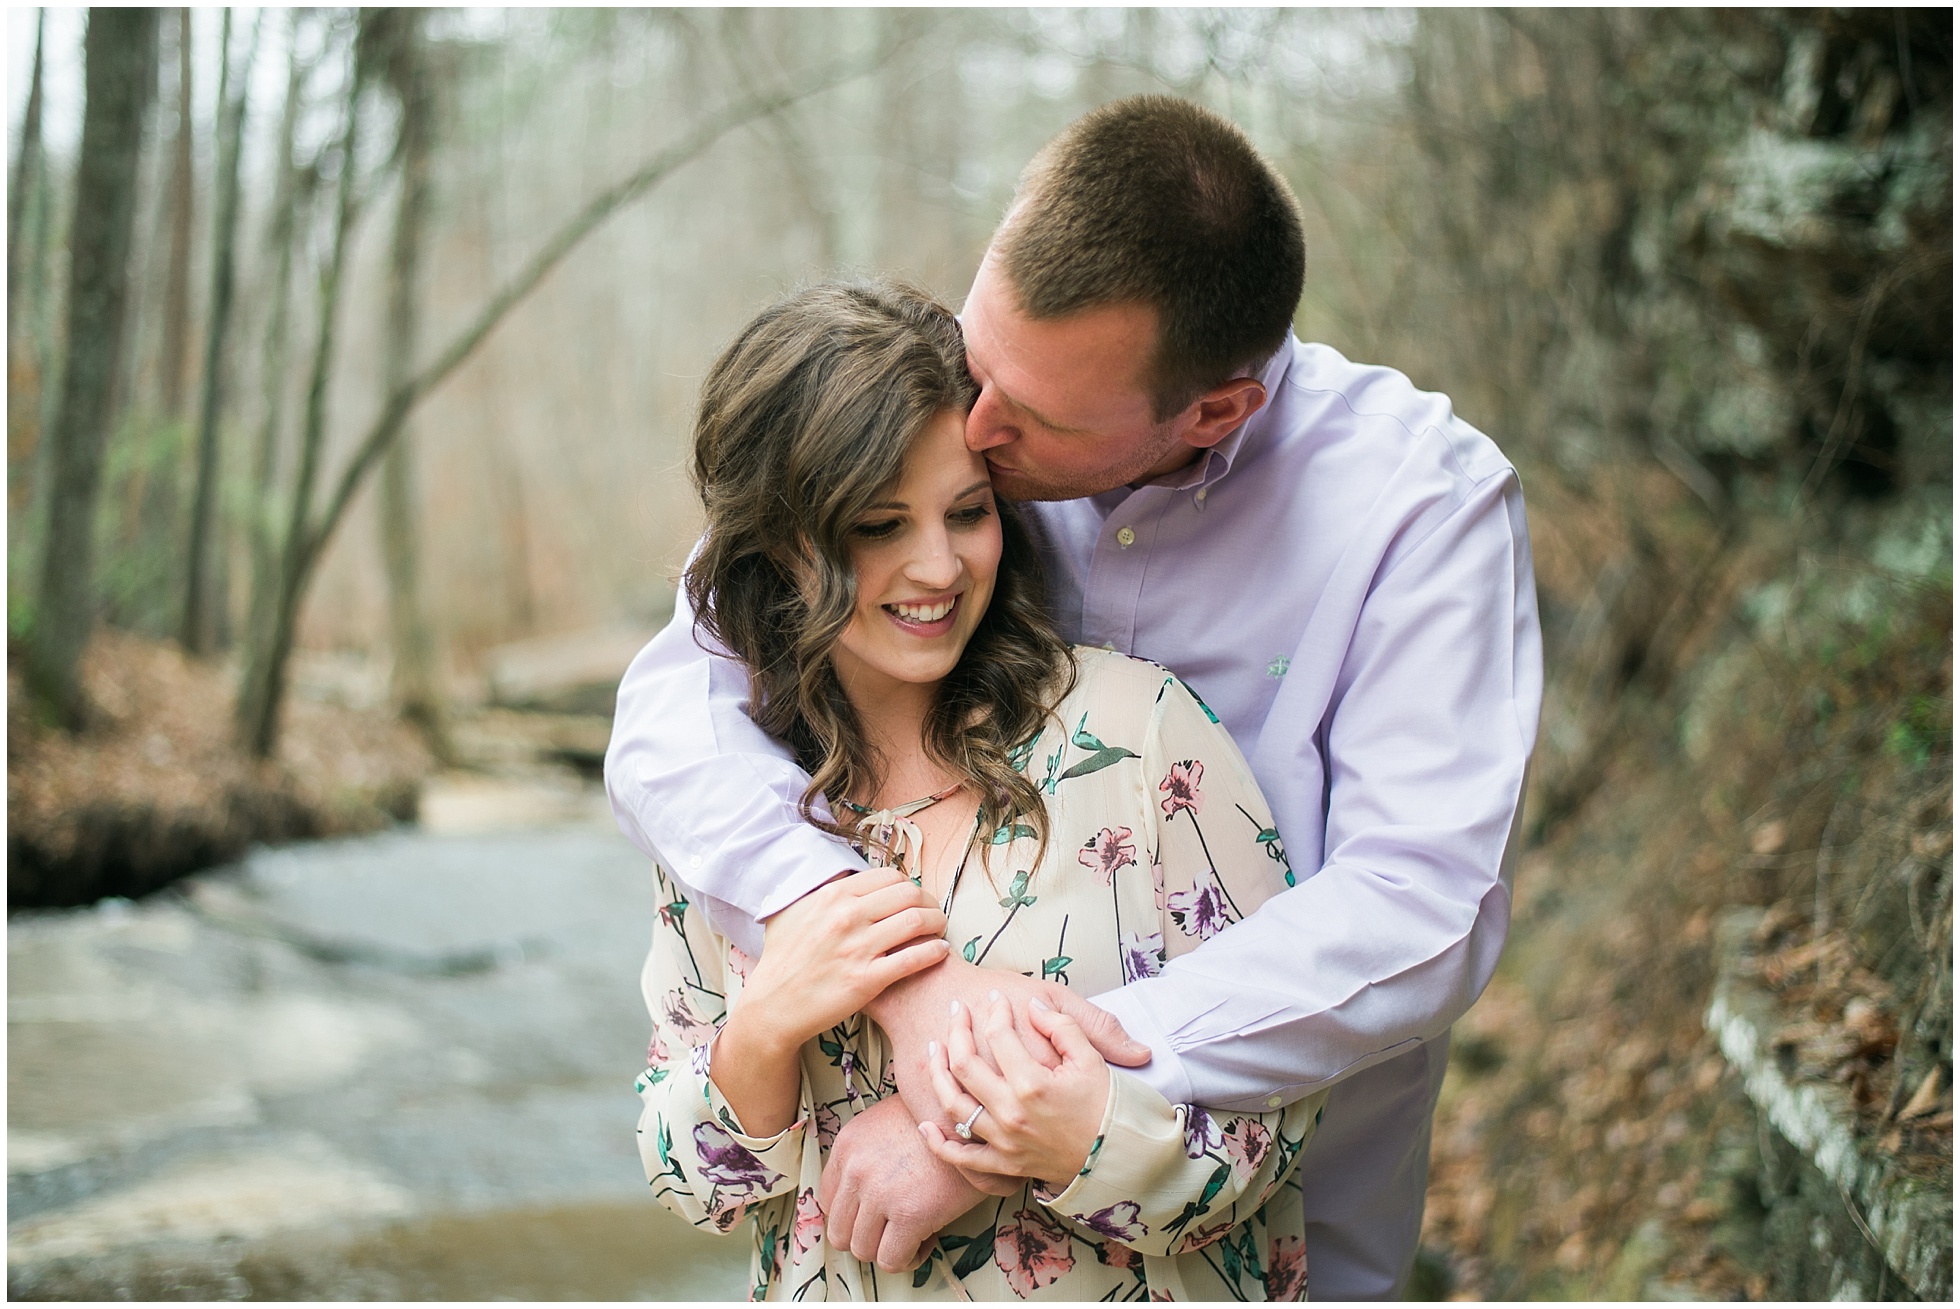 Emily & Dylan | Creek and Field Engagement Session | Birmingham, AL